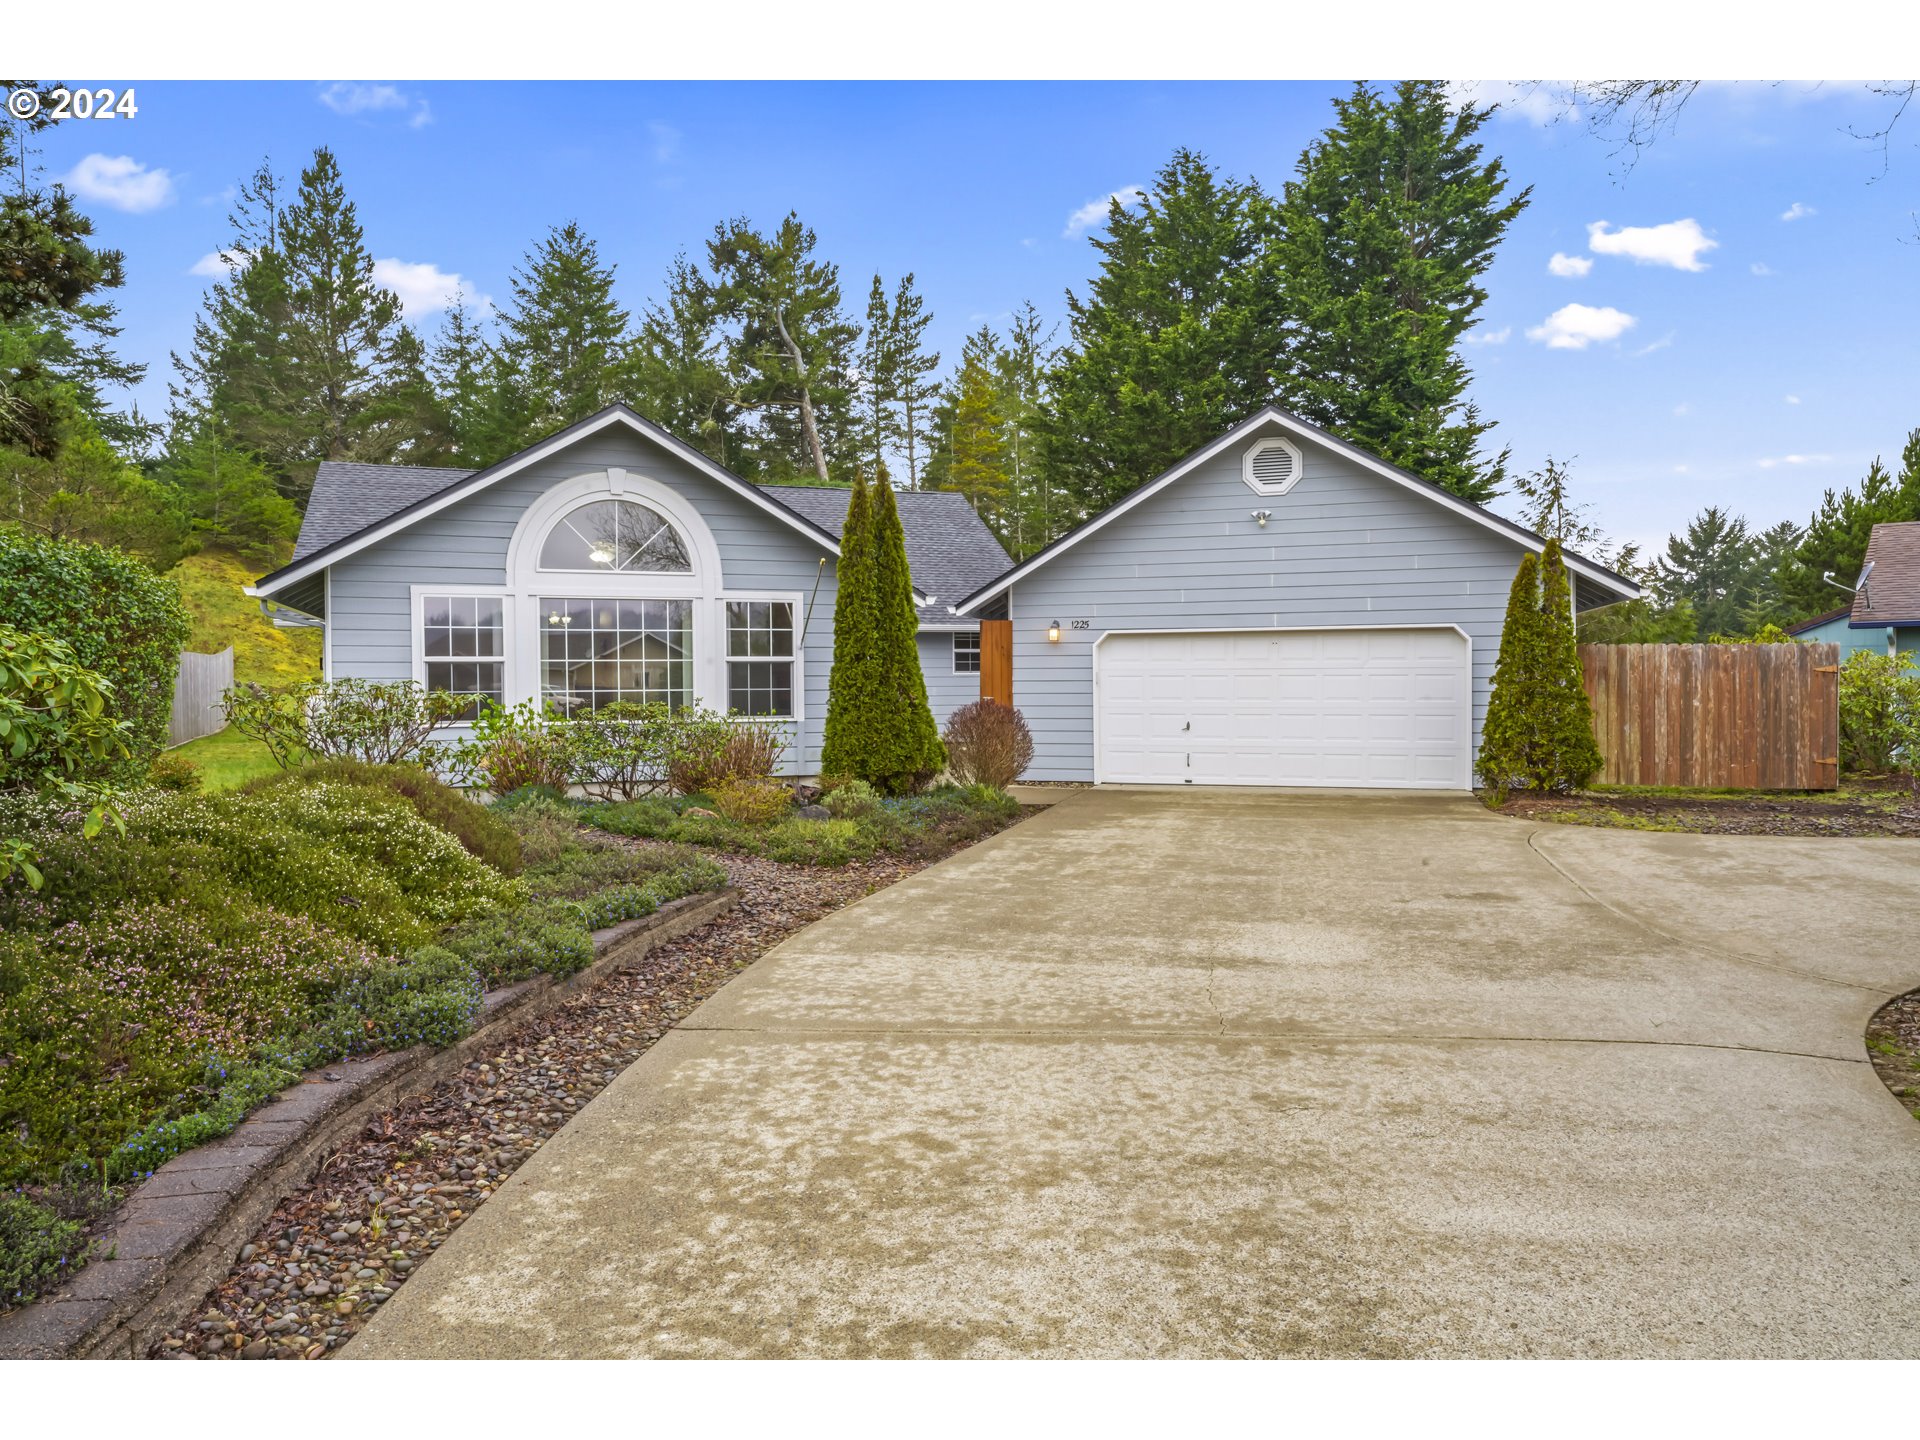 1225 WILLOW CT, Florence, OR 